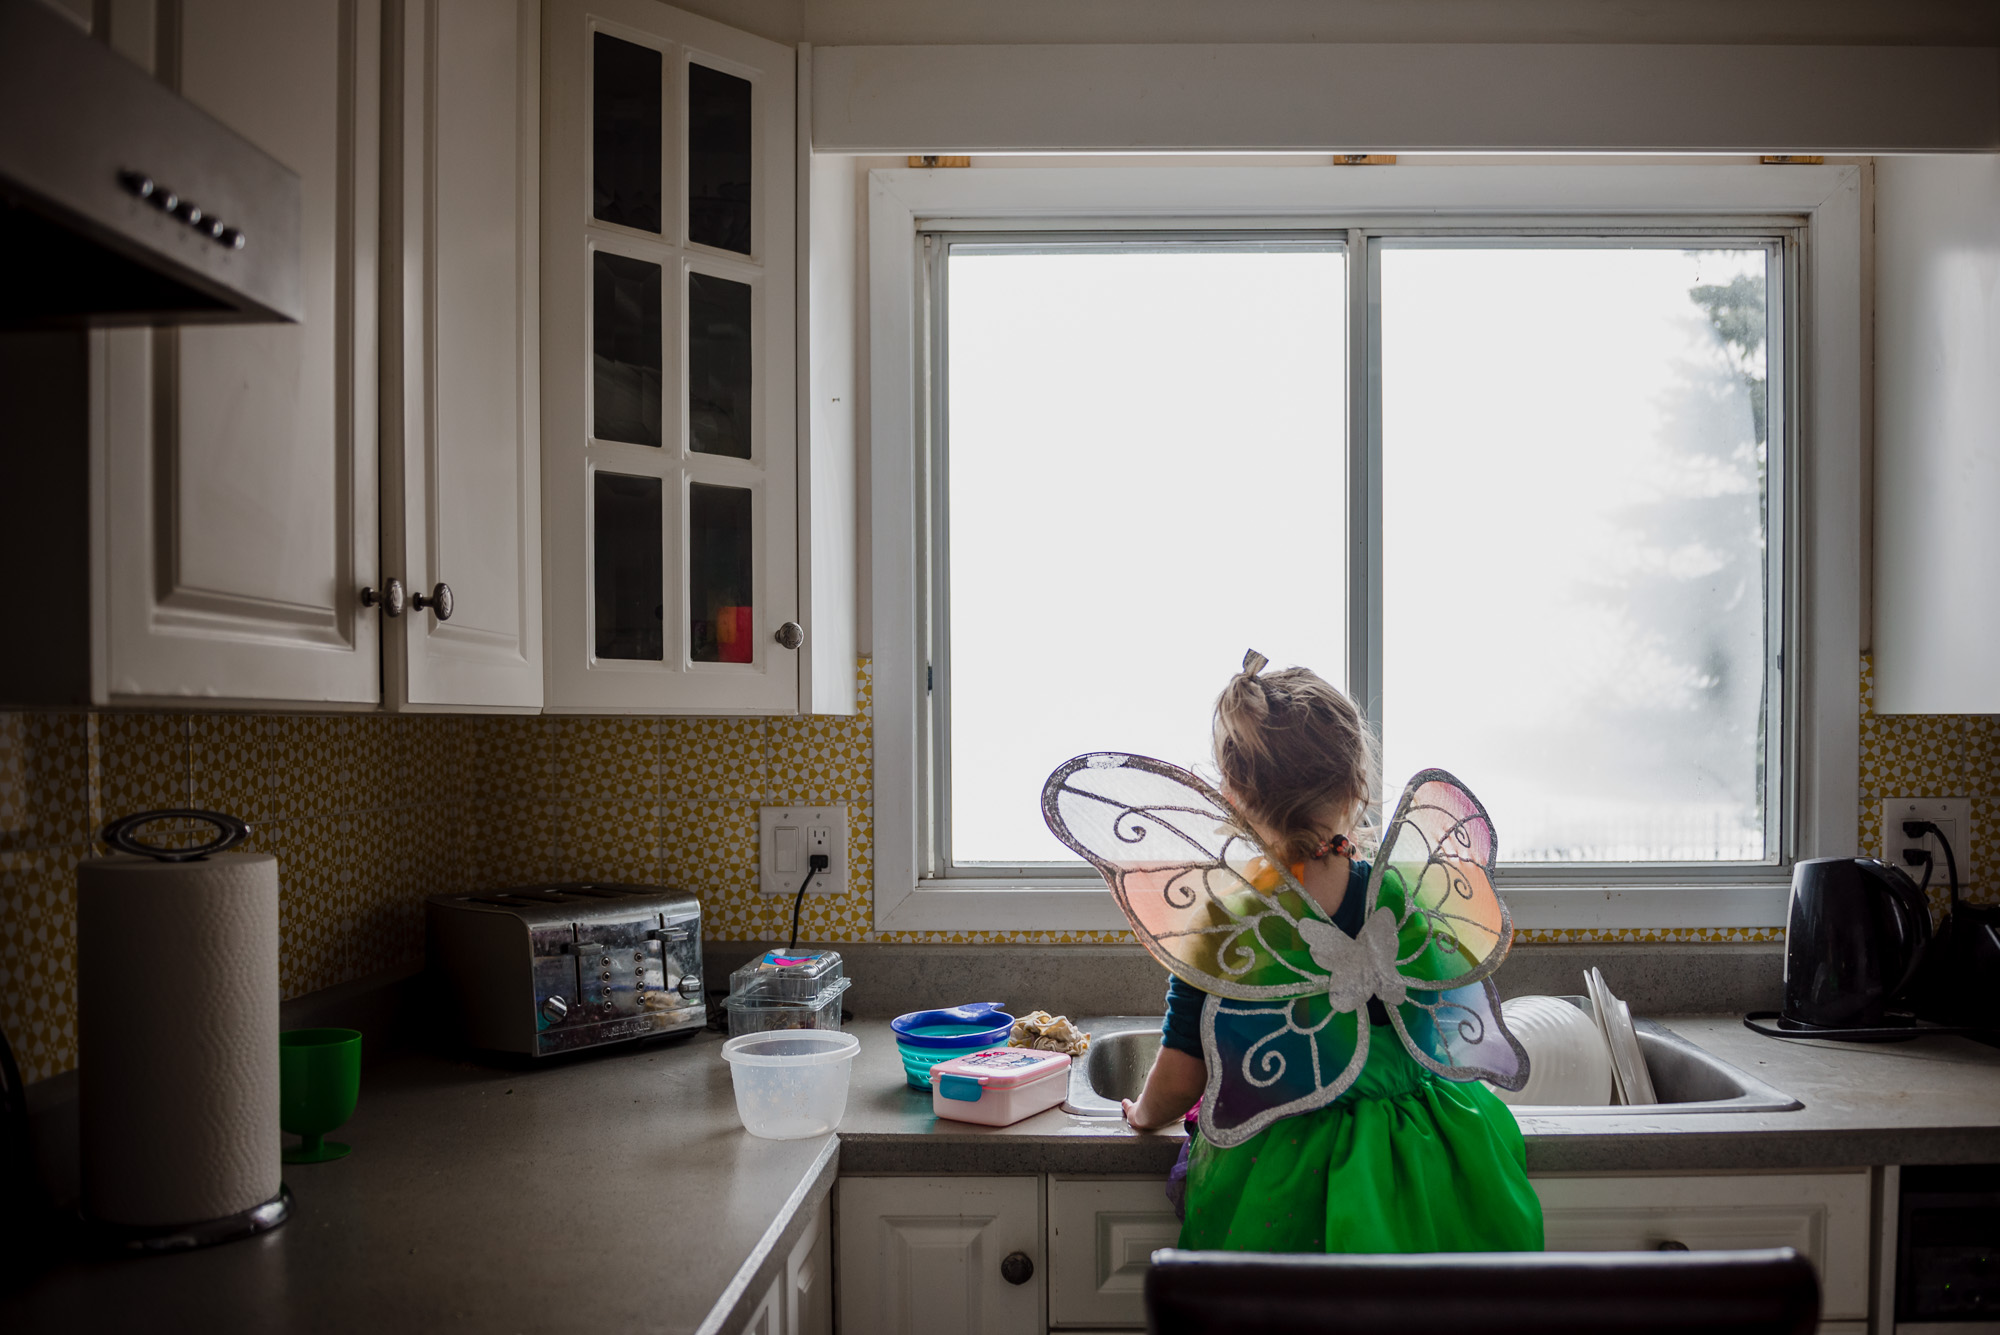 A little girl dressed as a fairy plays at the kitchen sink